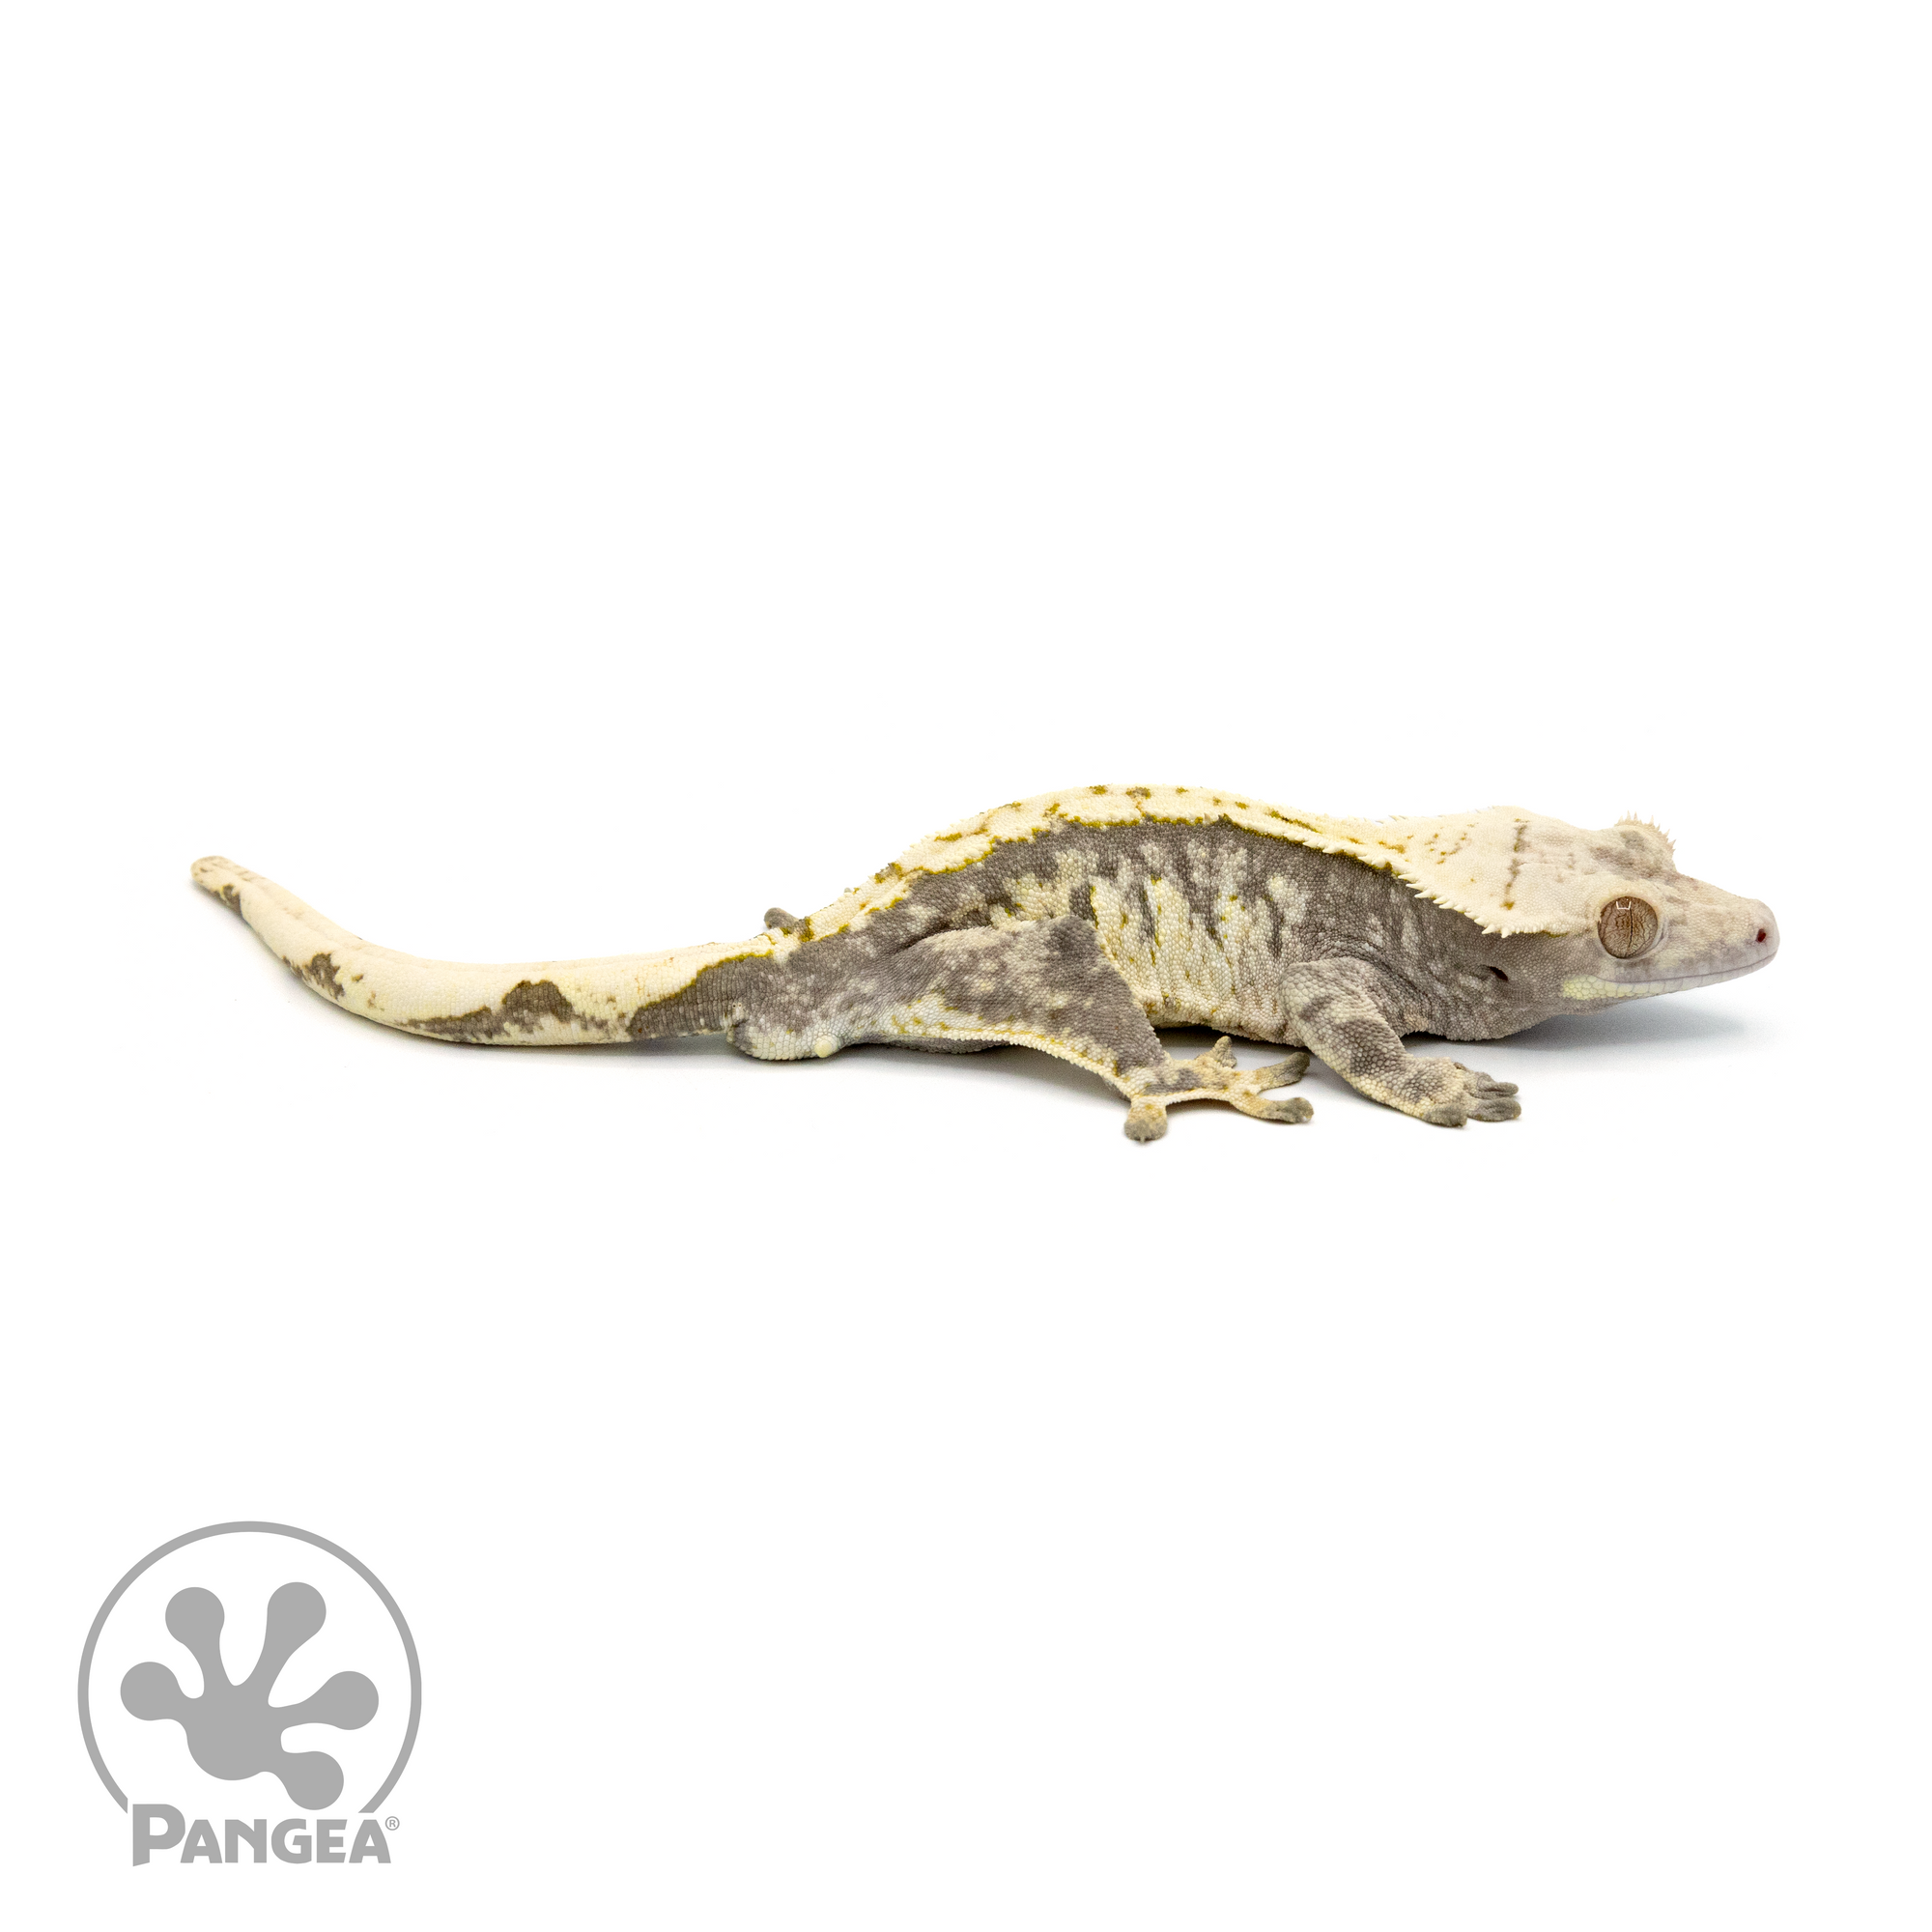 Male Extreme Harlequin Crested Gecko Cr-1364 looking right 